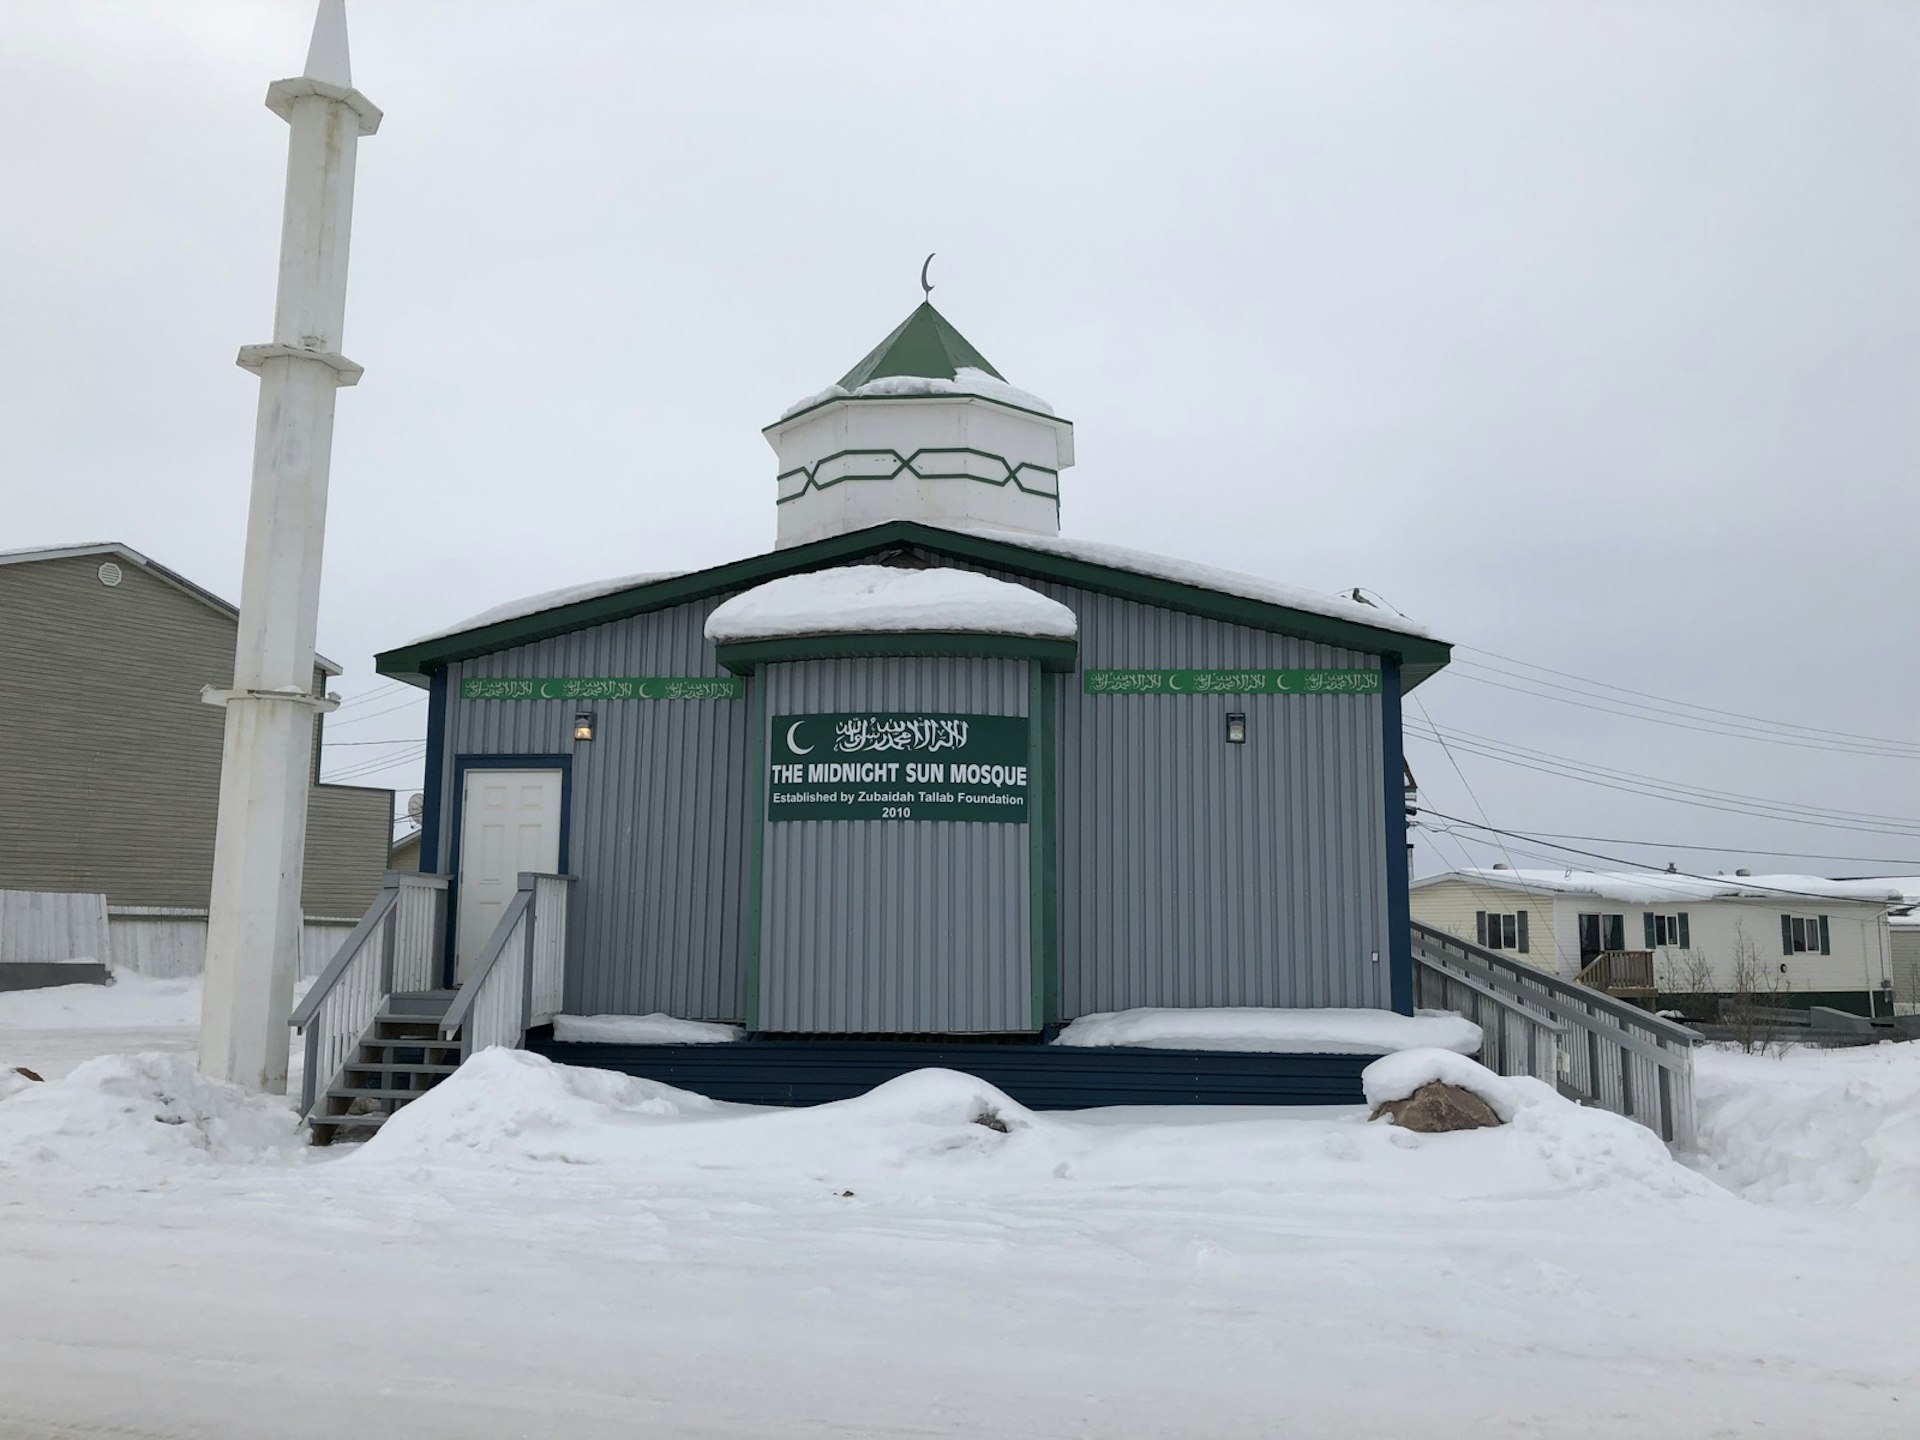 A tiny steel building has been turned into a snow-covered mosque, complete with minaret, in the Northwest Territories